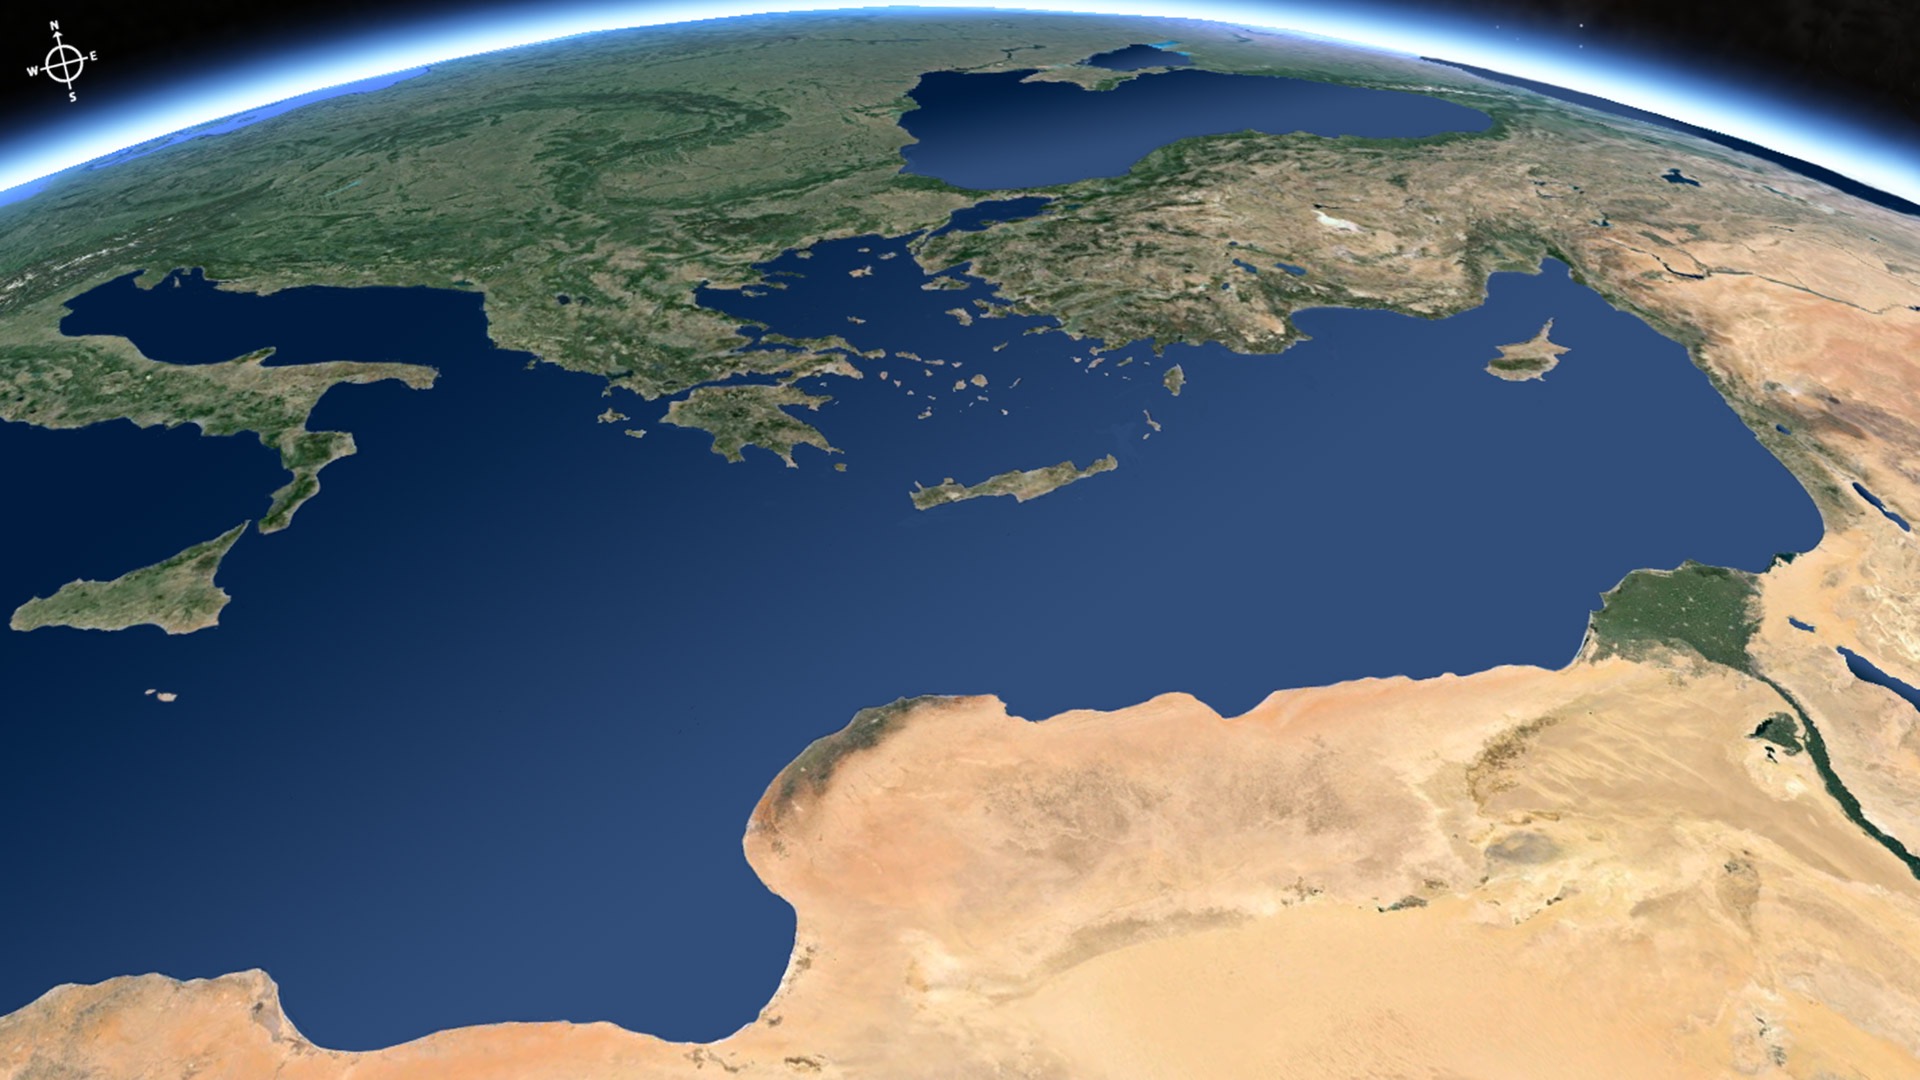 Satellite view of the Eastern Mediterranean. Image from Free Bible Images. CC BY-NC-SA 4.0 DEED.